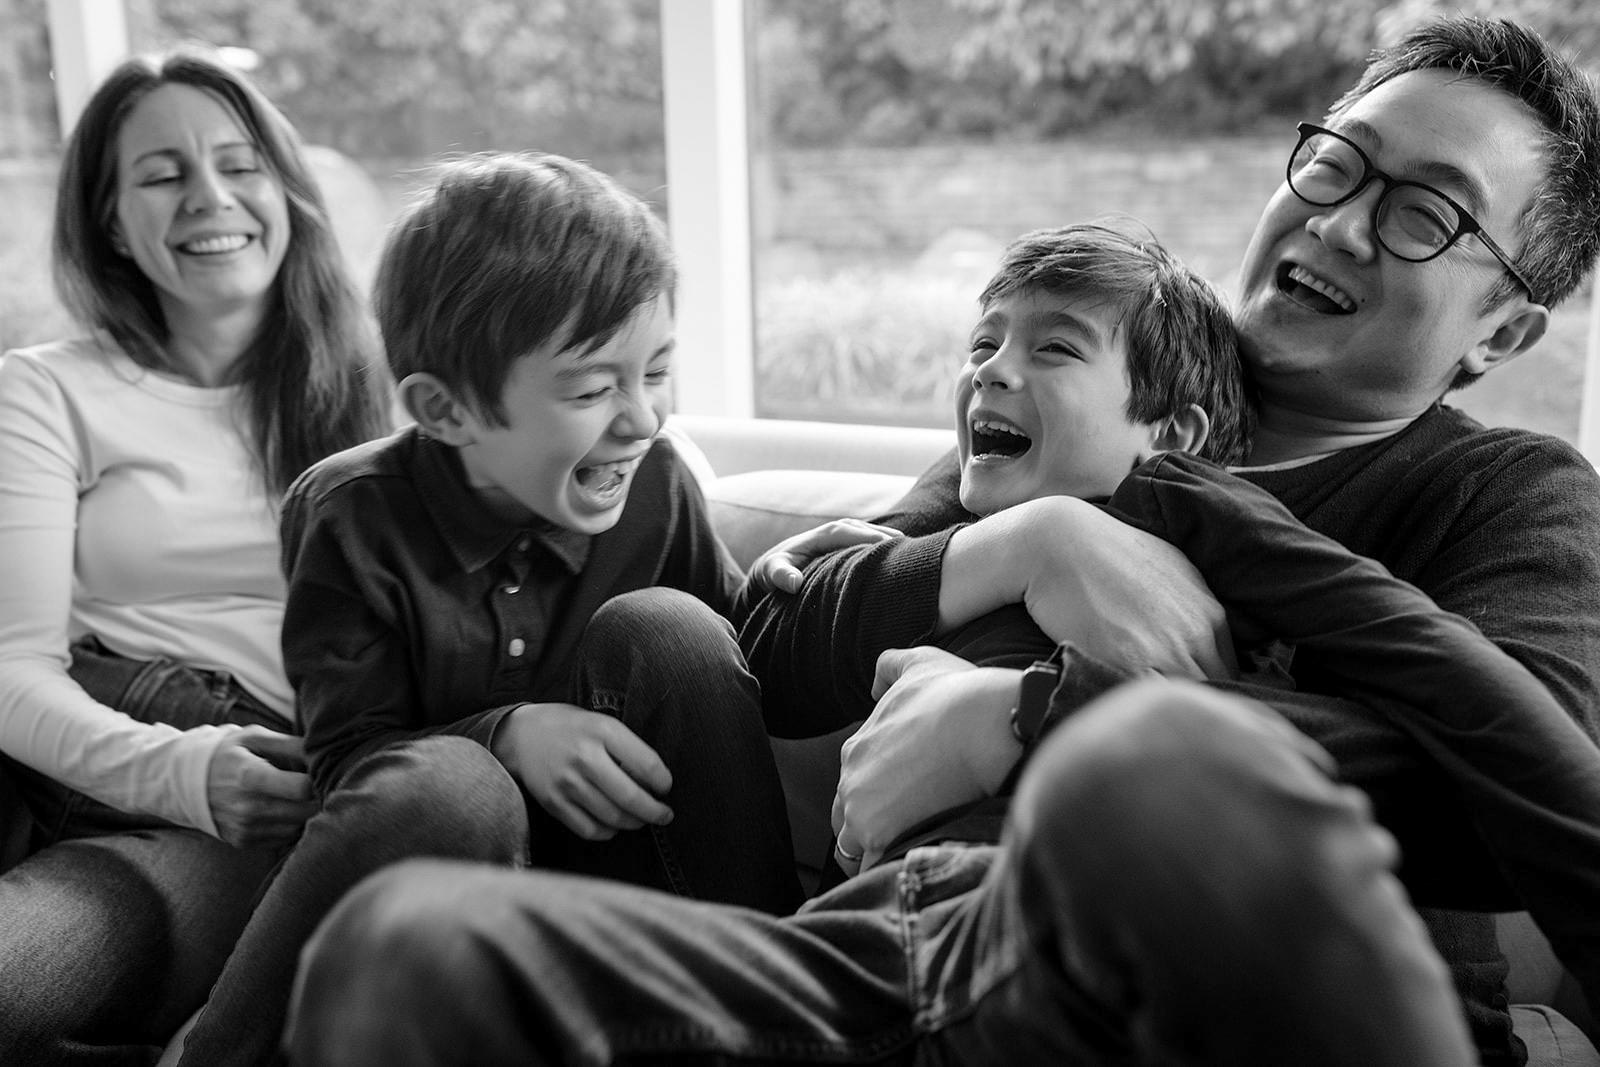 Fun Portland family portrait by Kenny Kang Photography